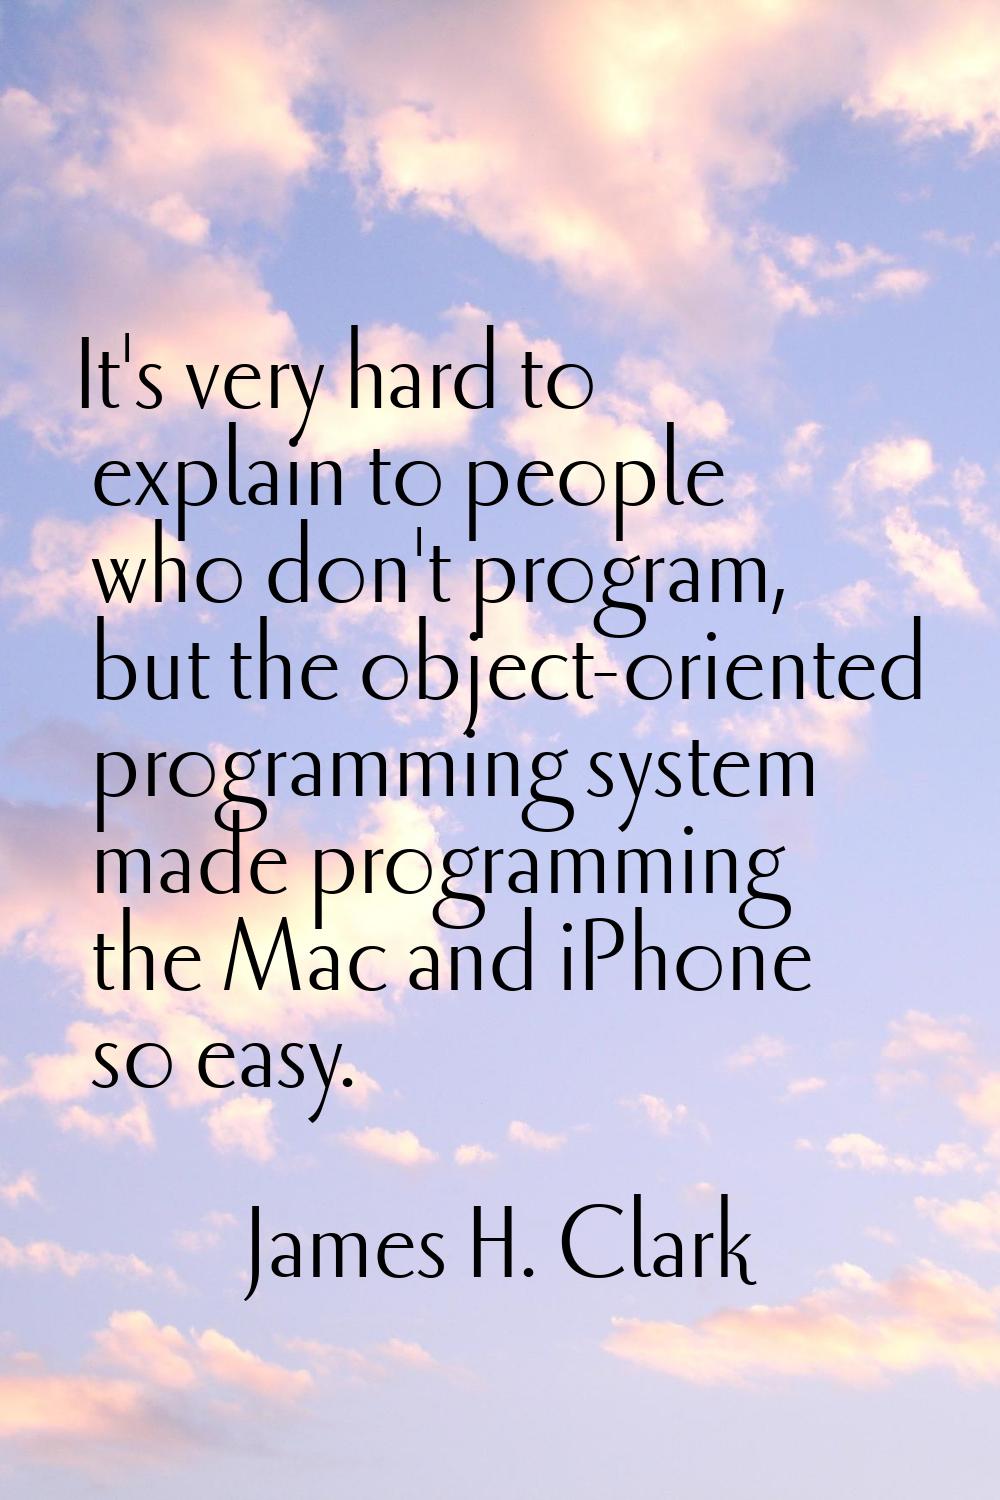 It's very hard to explain to people who don't program, but the object-oriented programming system m